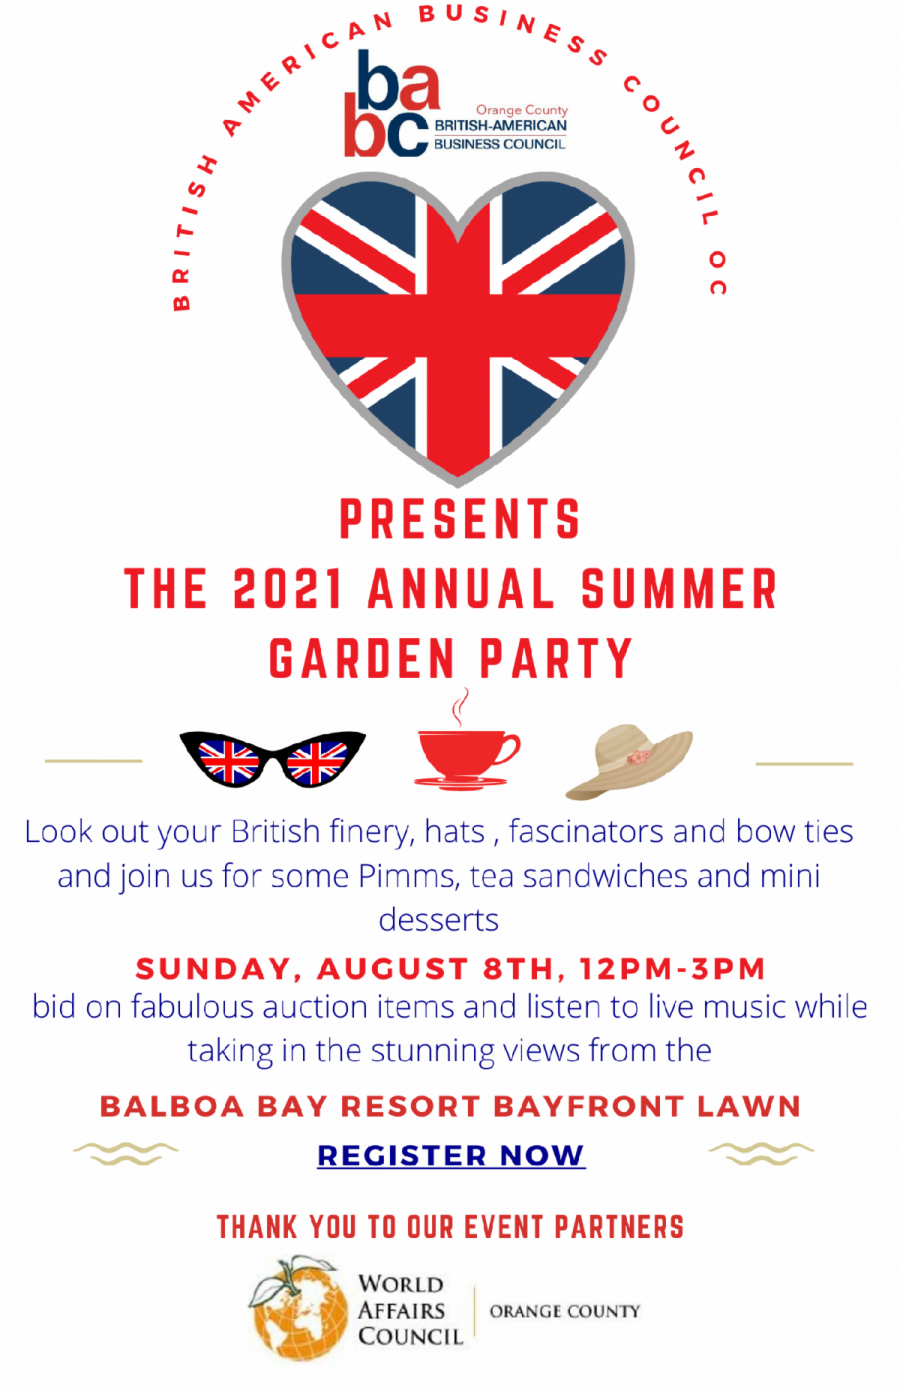 British American Business Council 2021 Annual Garden Party - Partnered Event